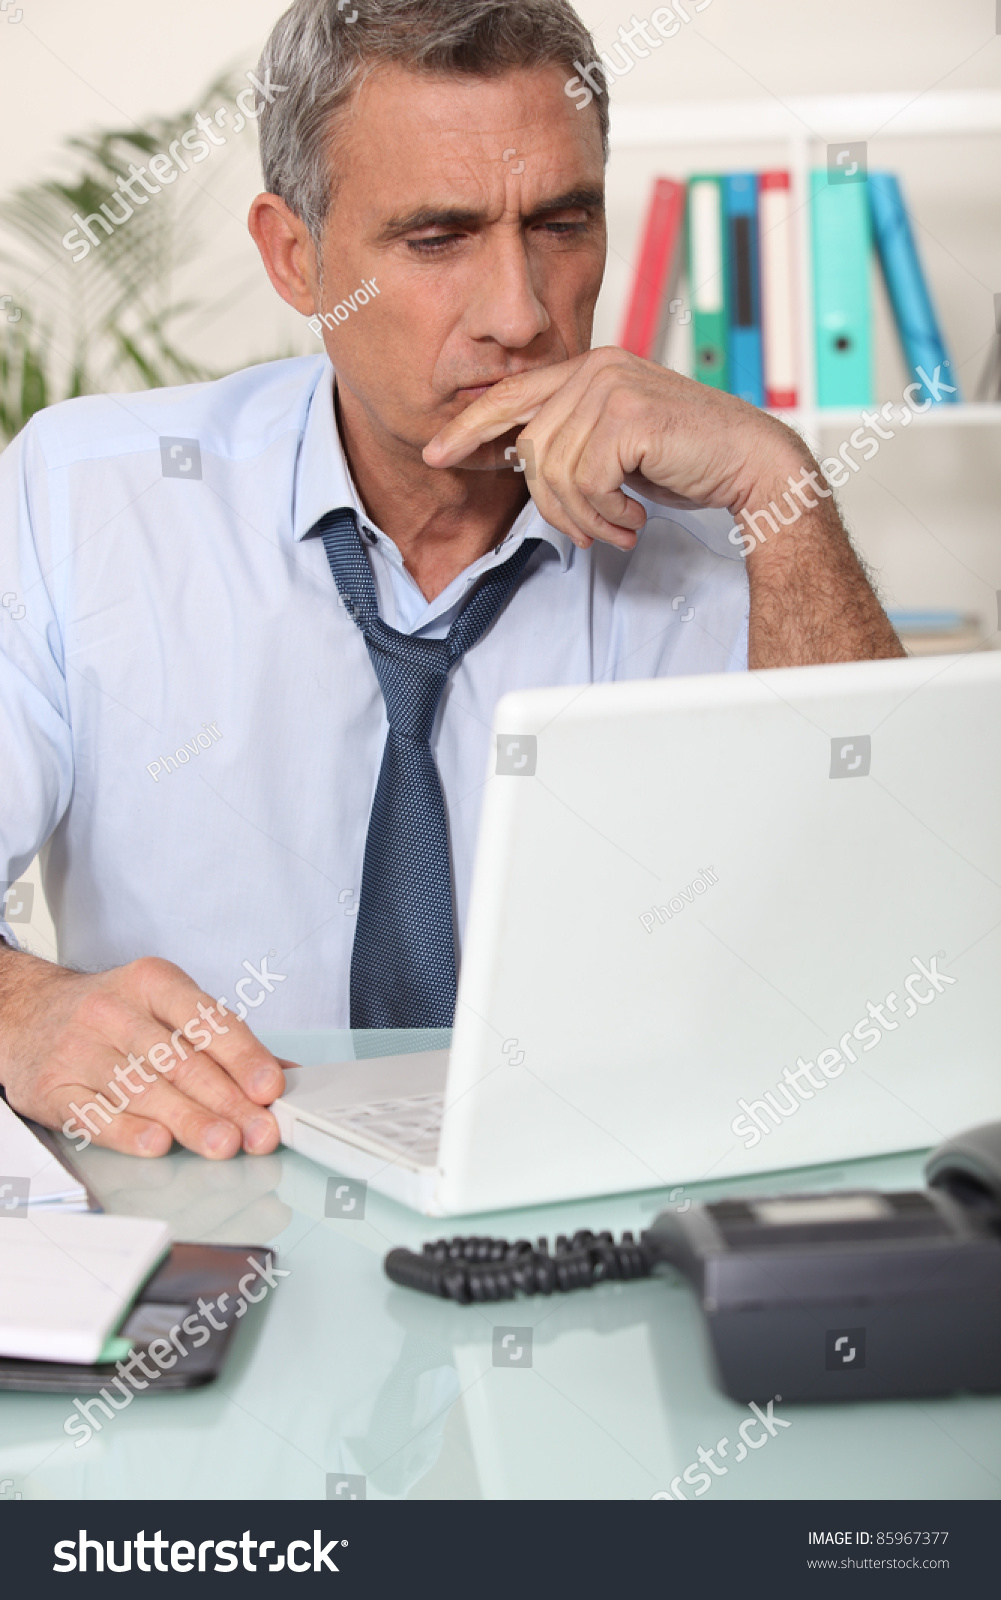 Grouchy man reading an email #85967377